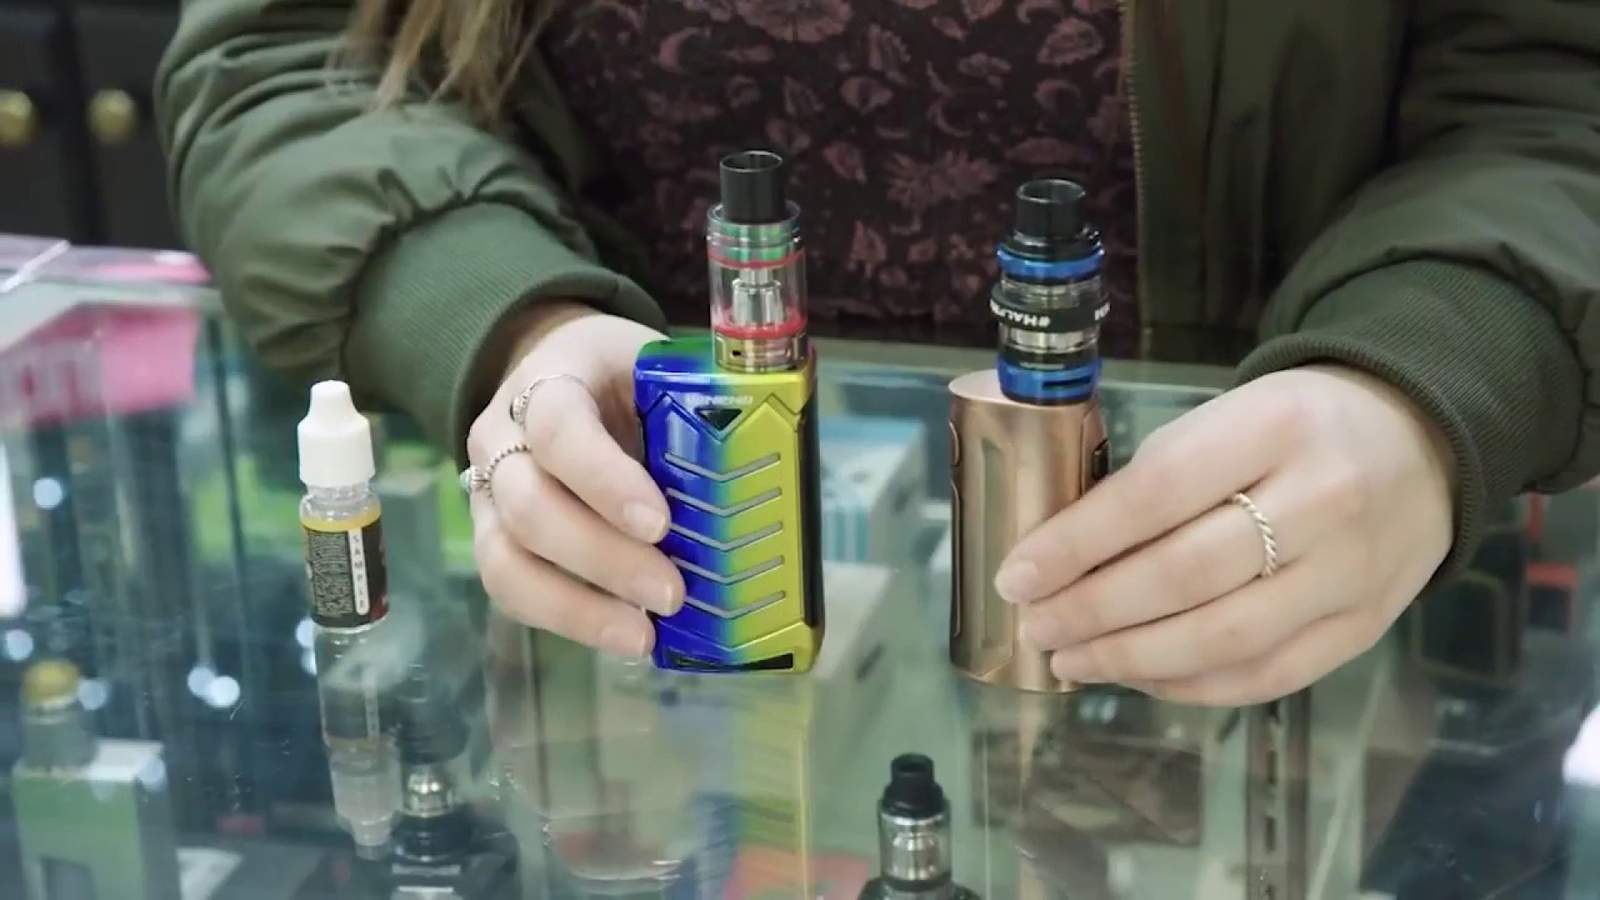 NEISD expels more than 40 students after discovering they were vaping THC